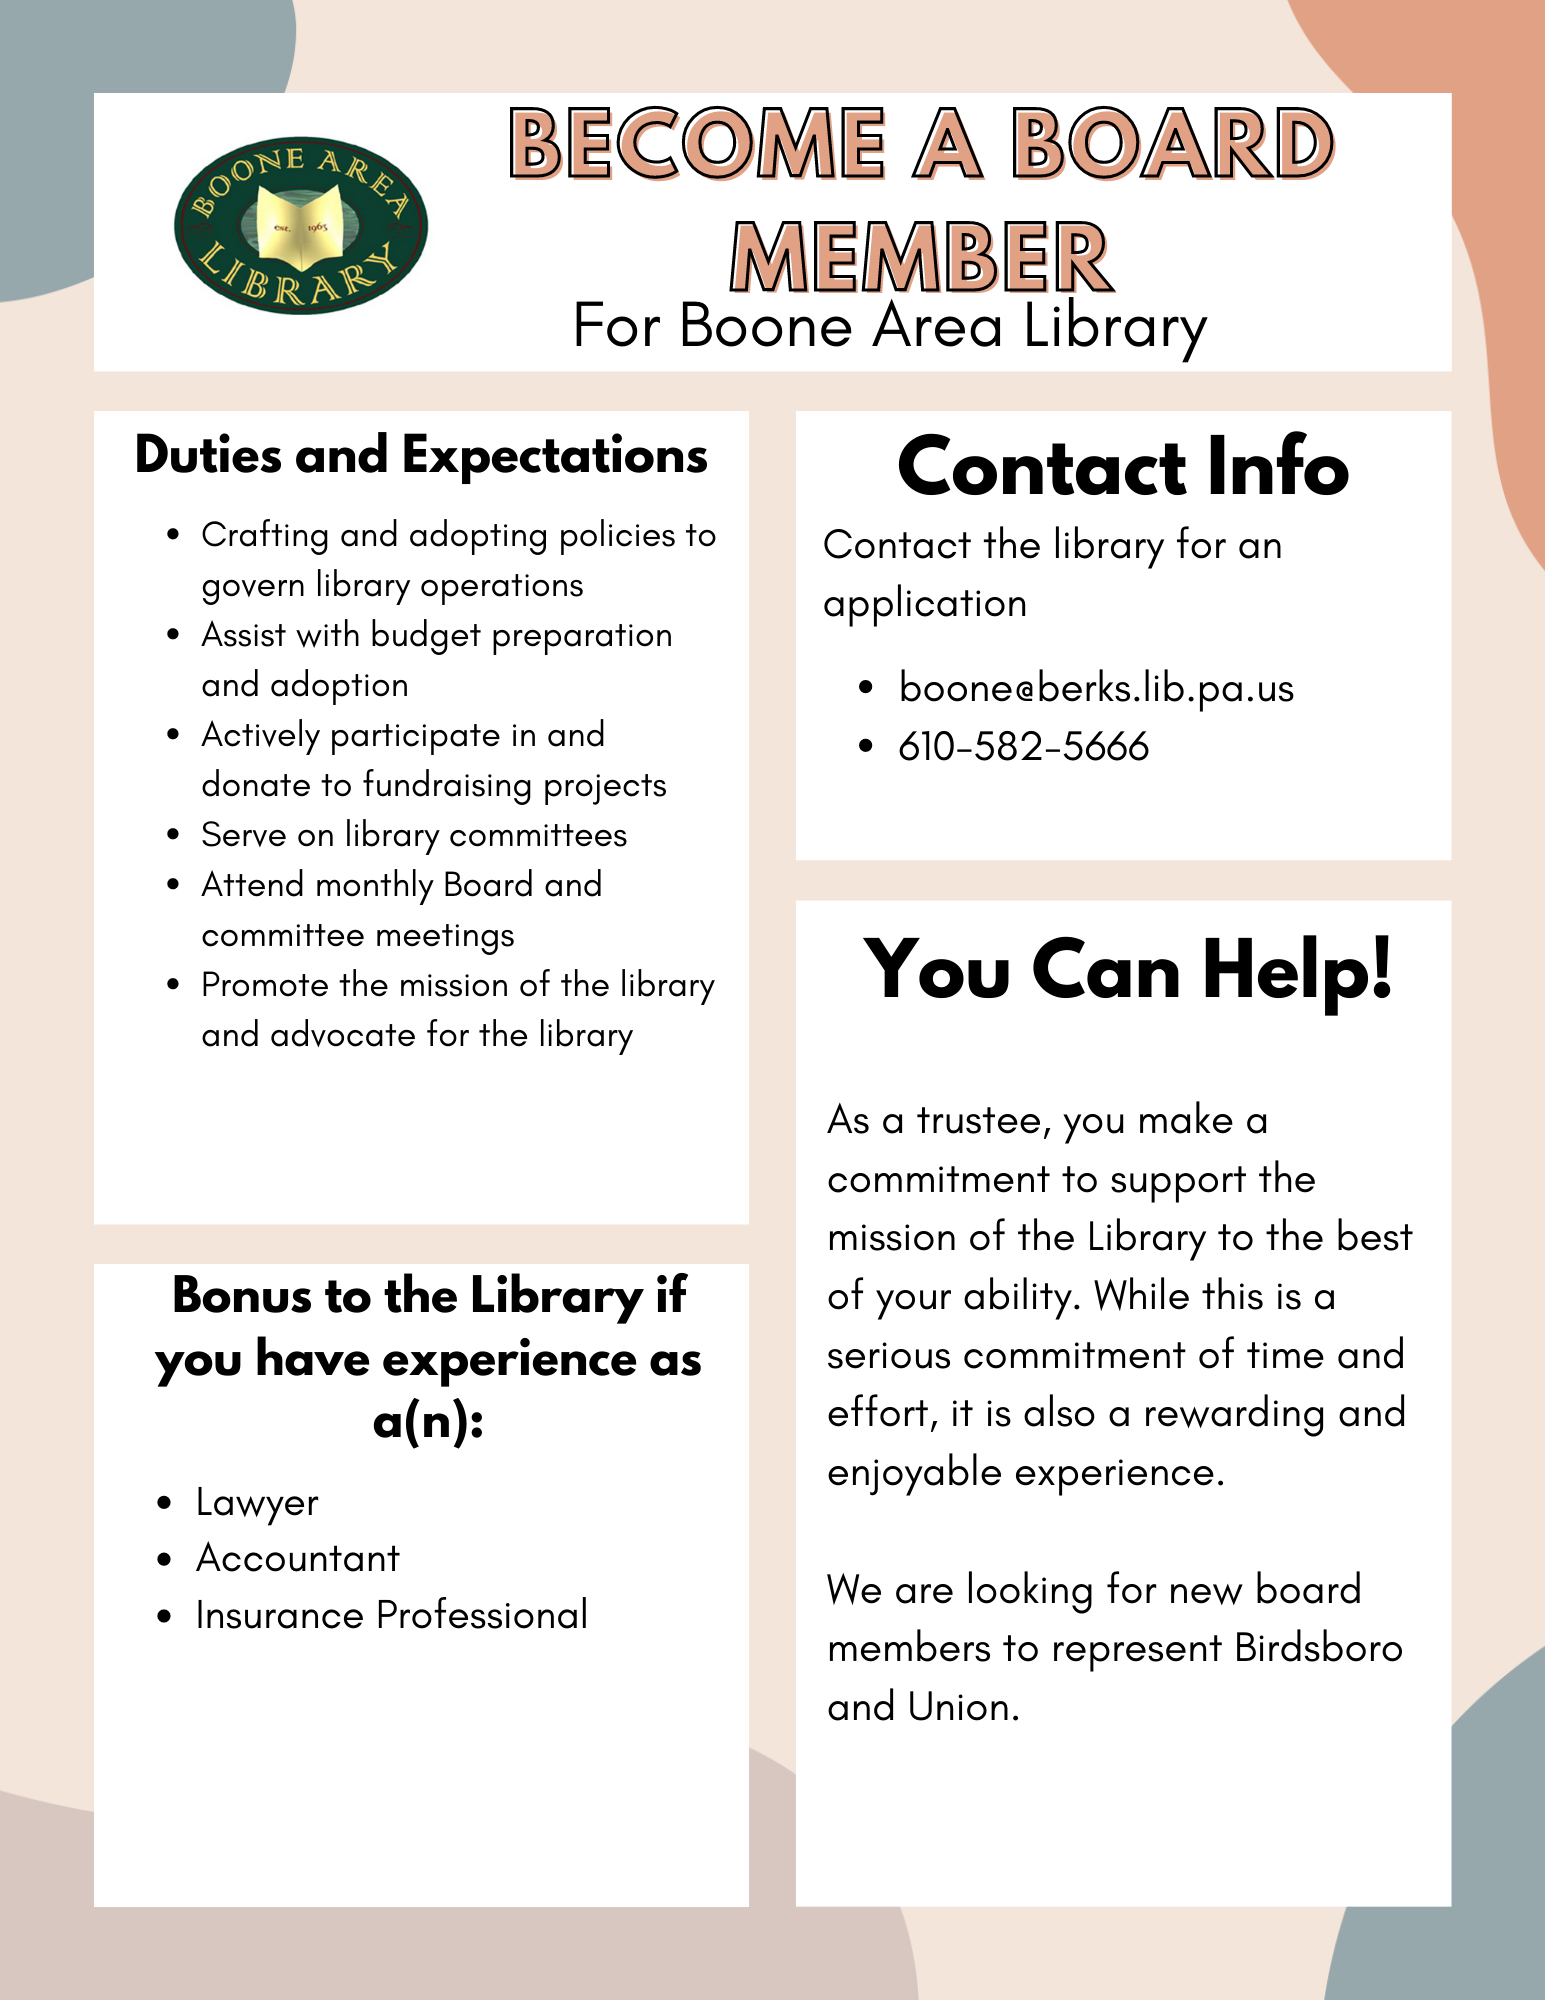 Become a board member flyer describing board member tasks and requirements